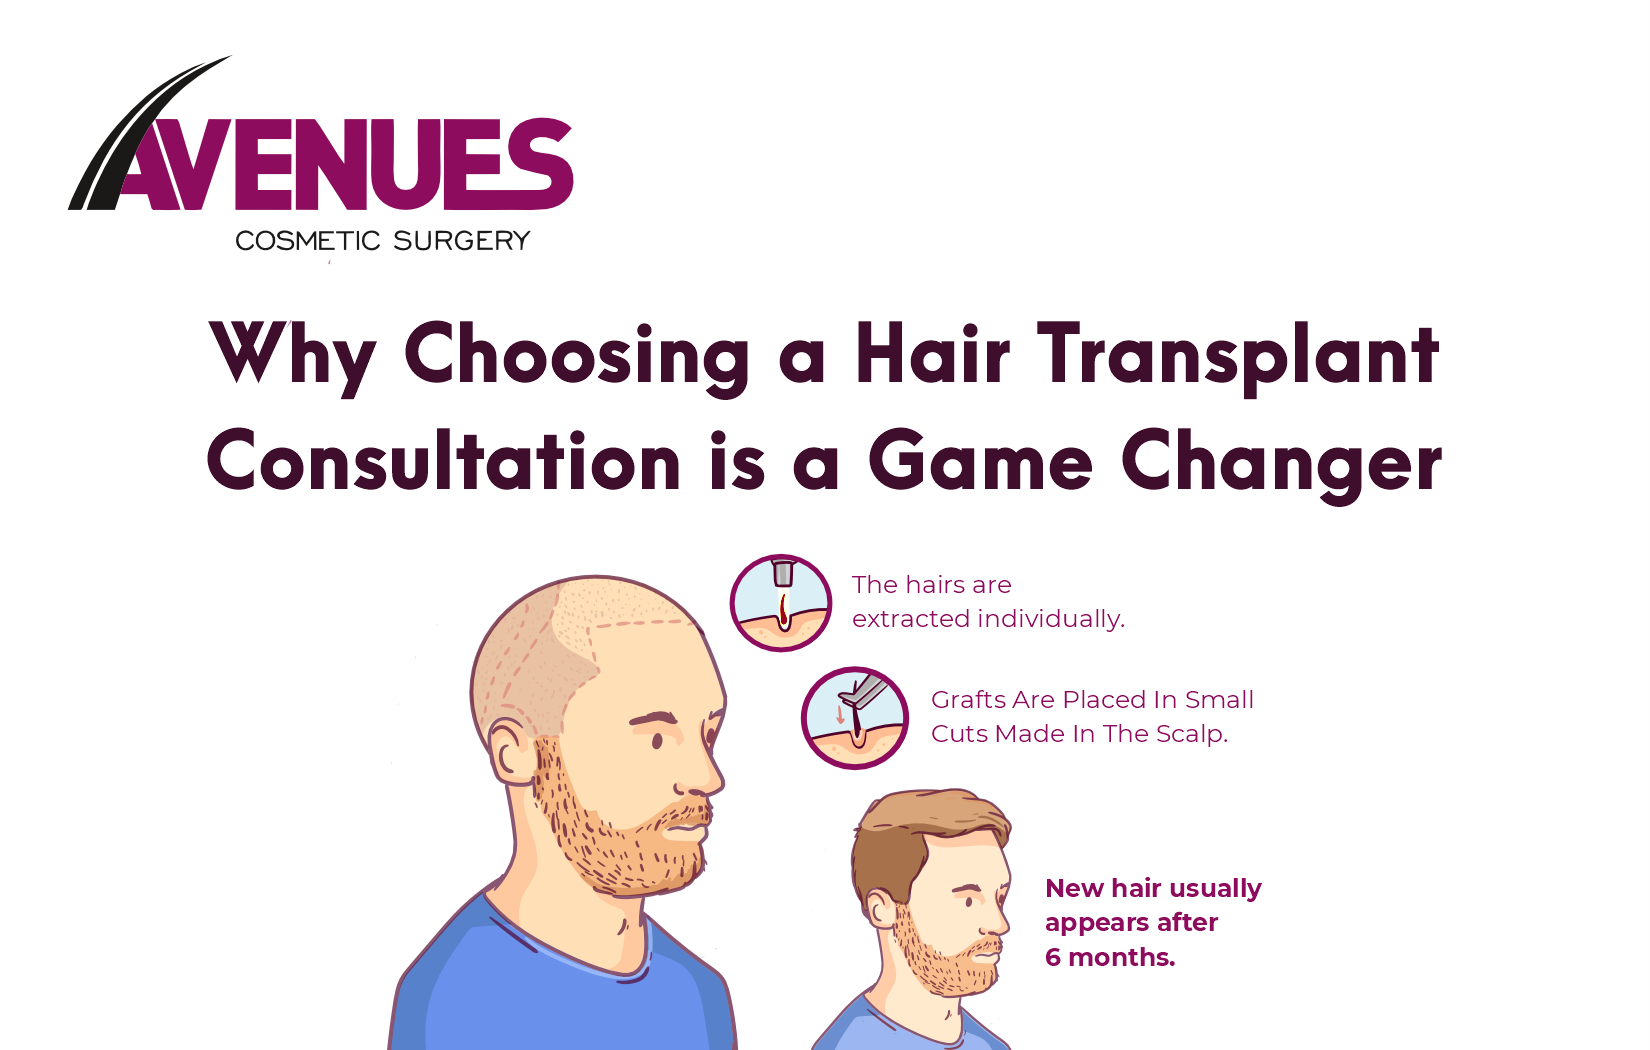 Why Choosing a Hair Transplant Consultation is a Game Changer